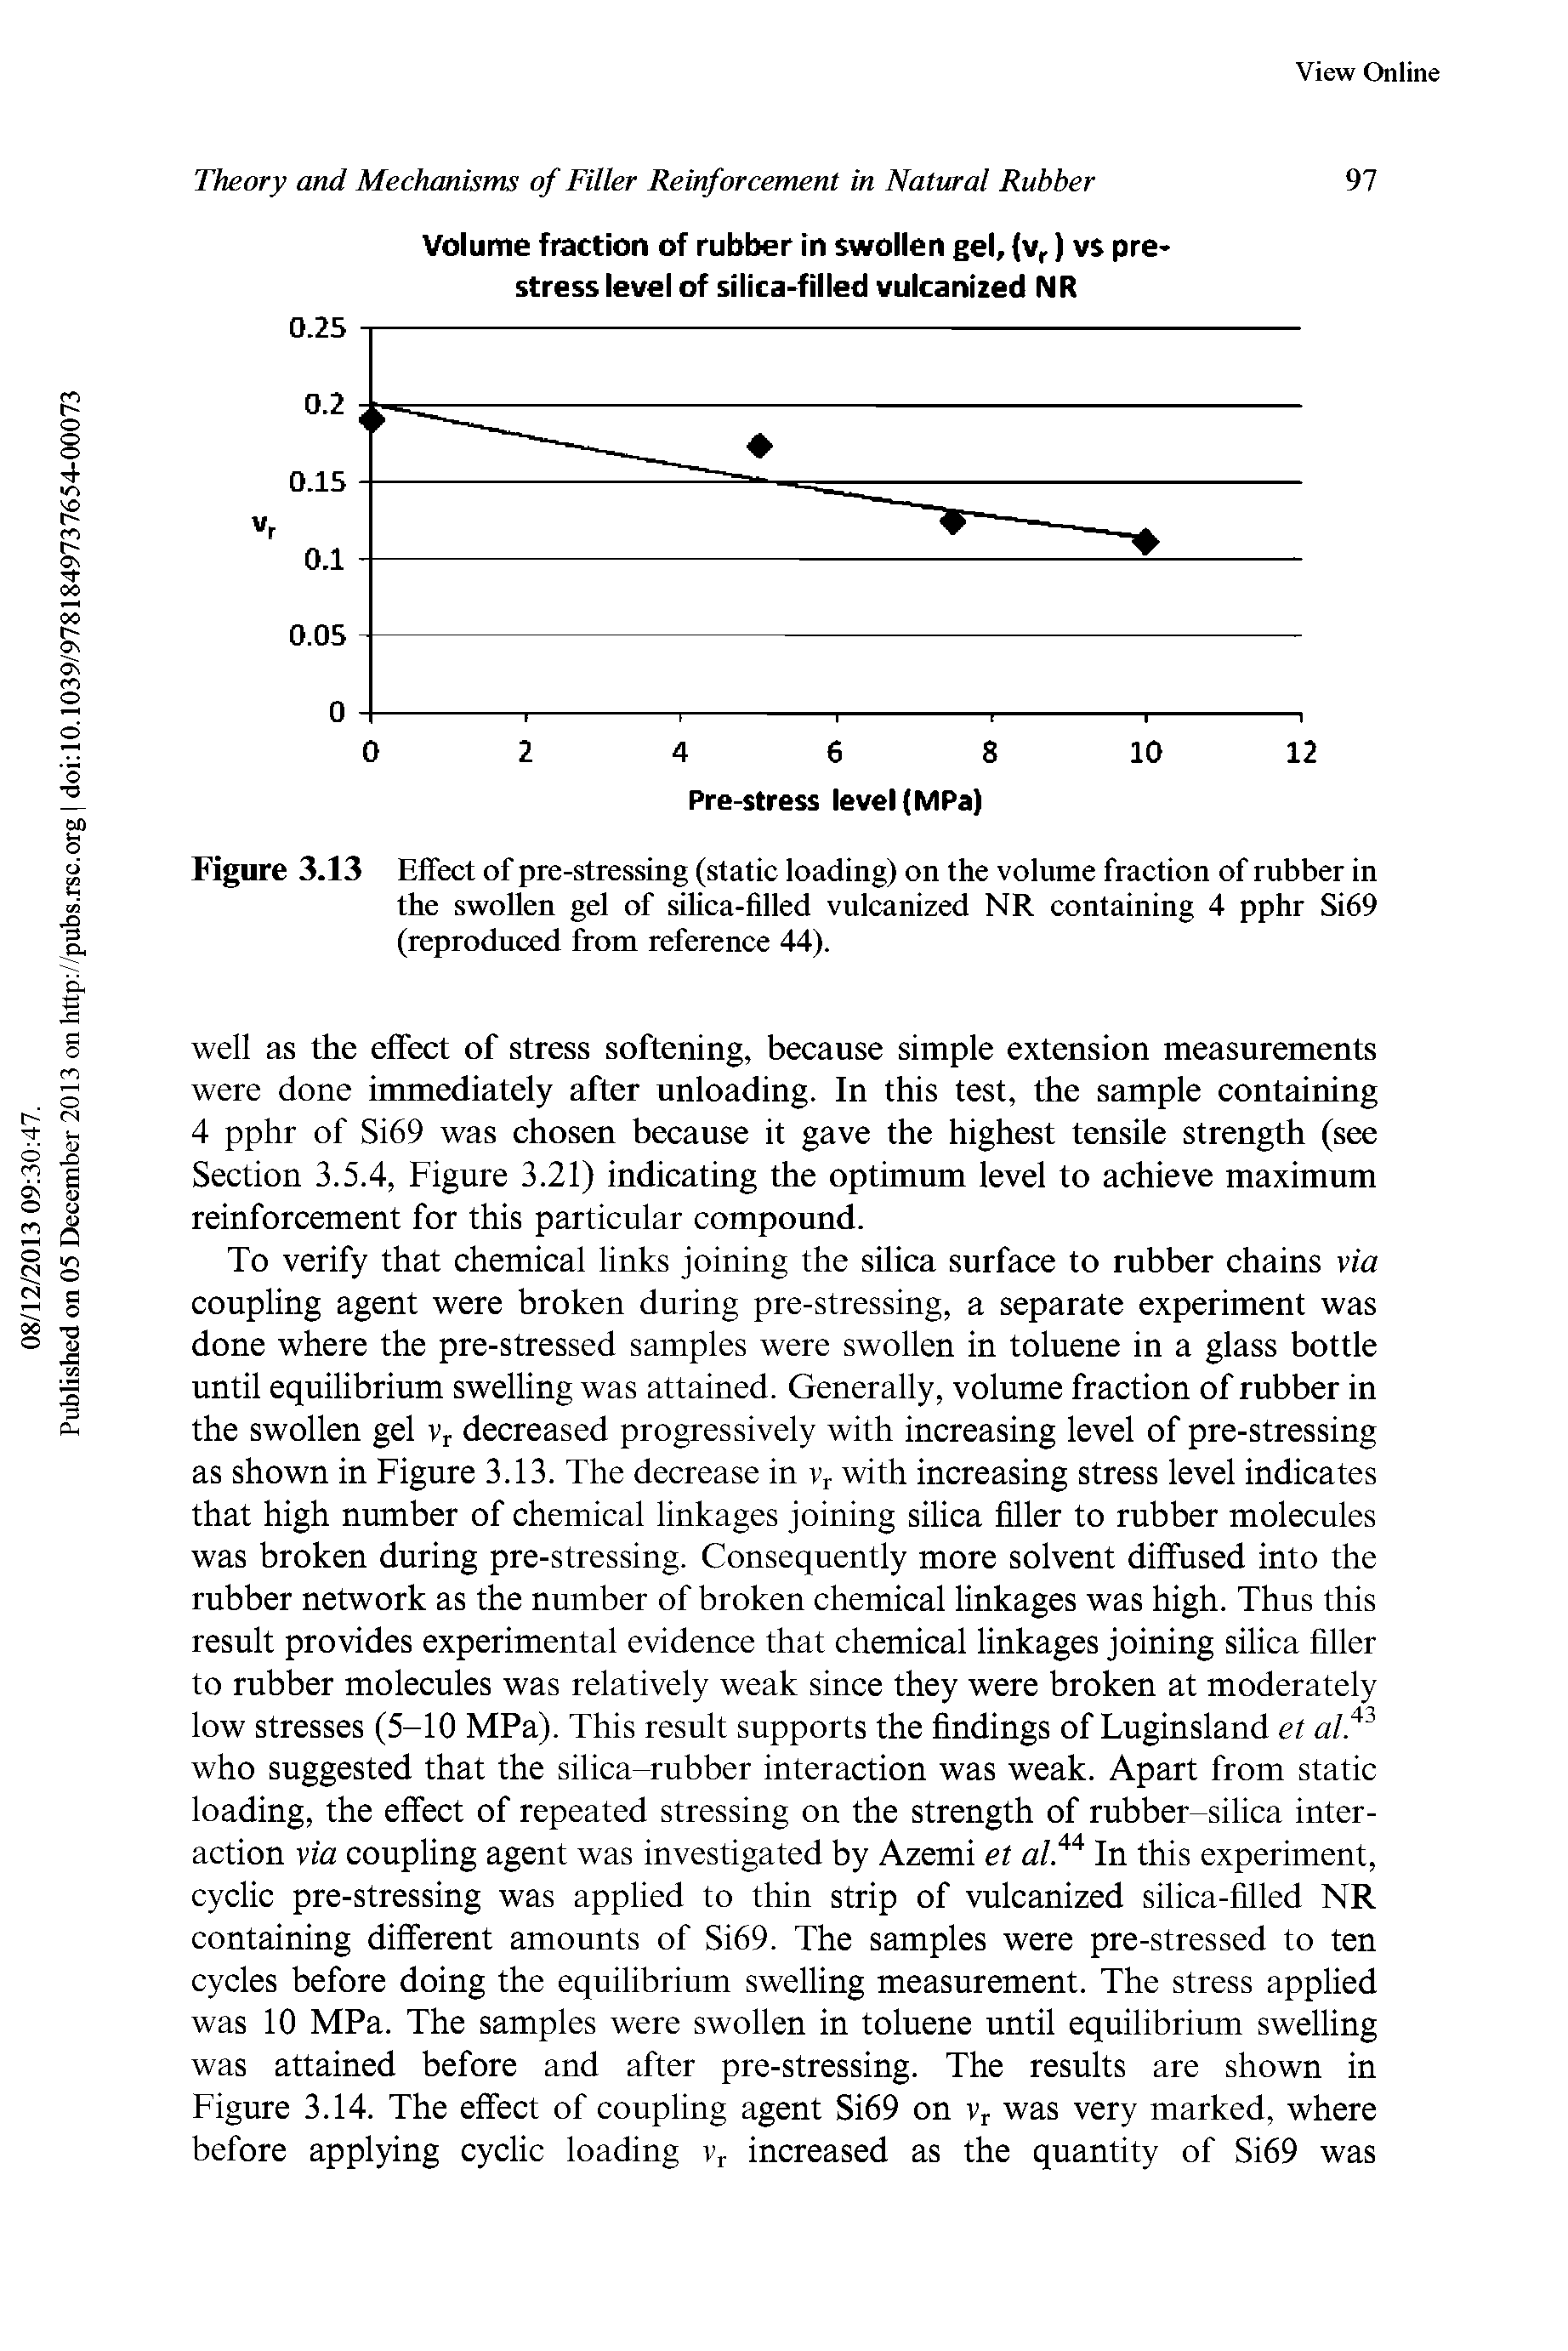 Figure 3.13 Effect of pre-stressing (static loading) on the volume fraction of rubber in the swollen gel of silica-filled vulcanized NR containing 4 pphr Si69 (reproduced from reference 44).